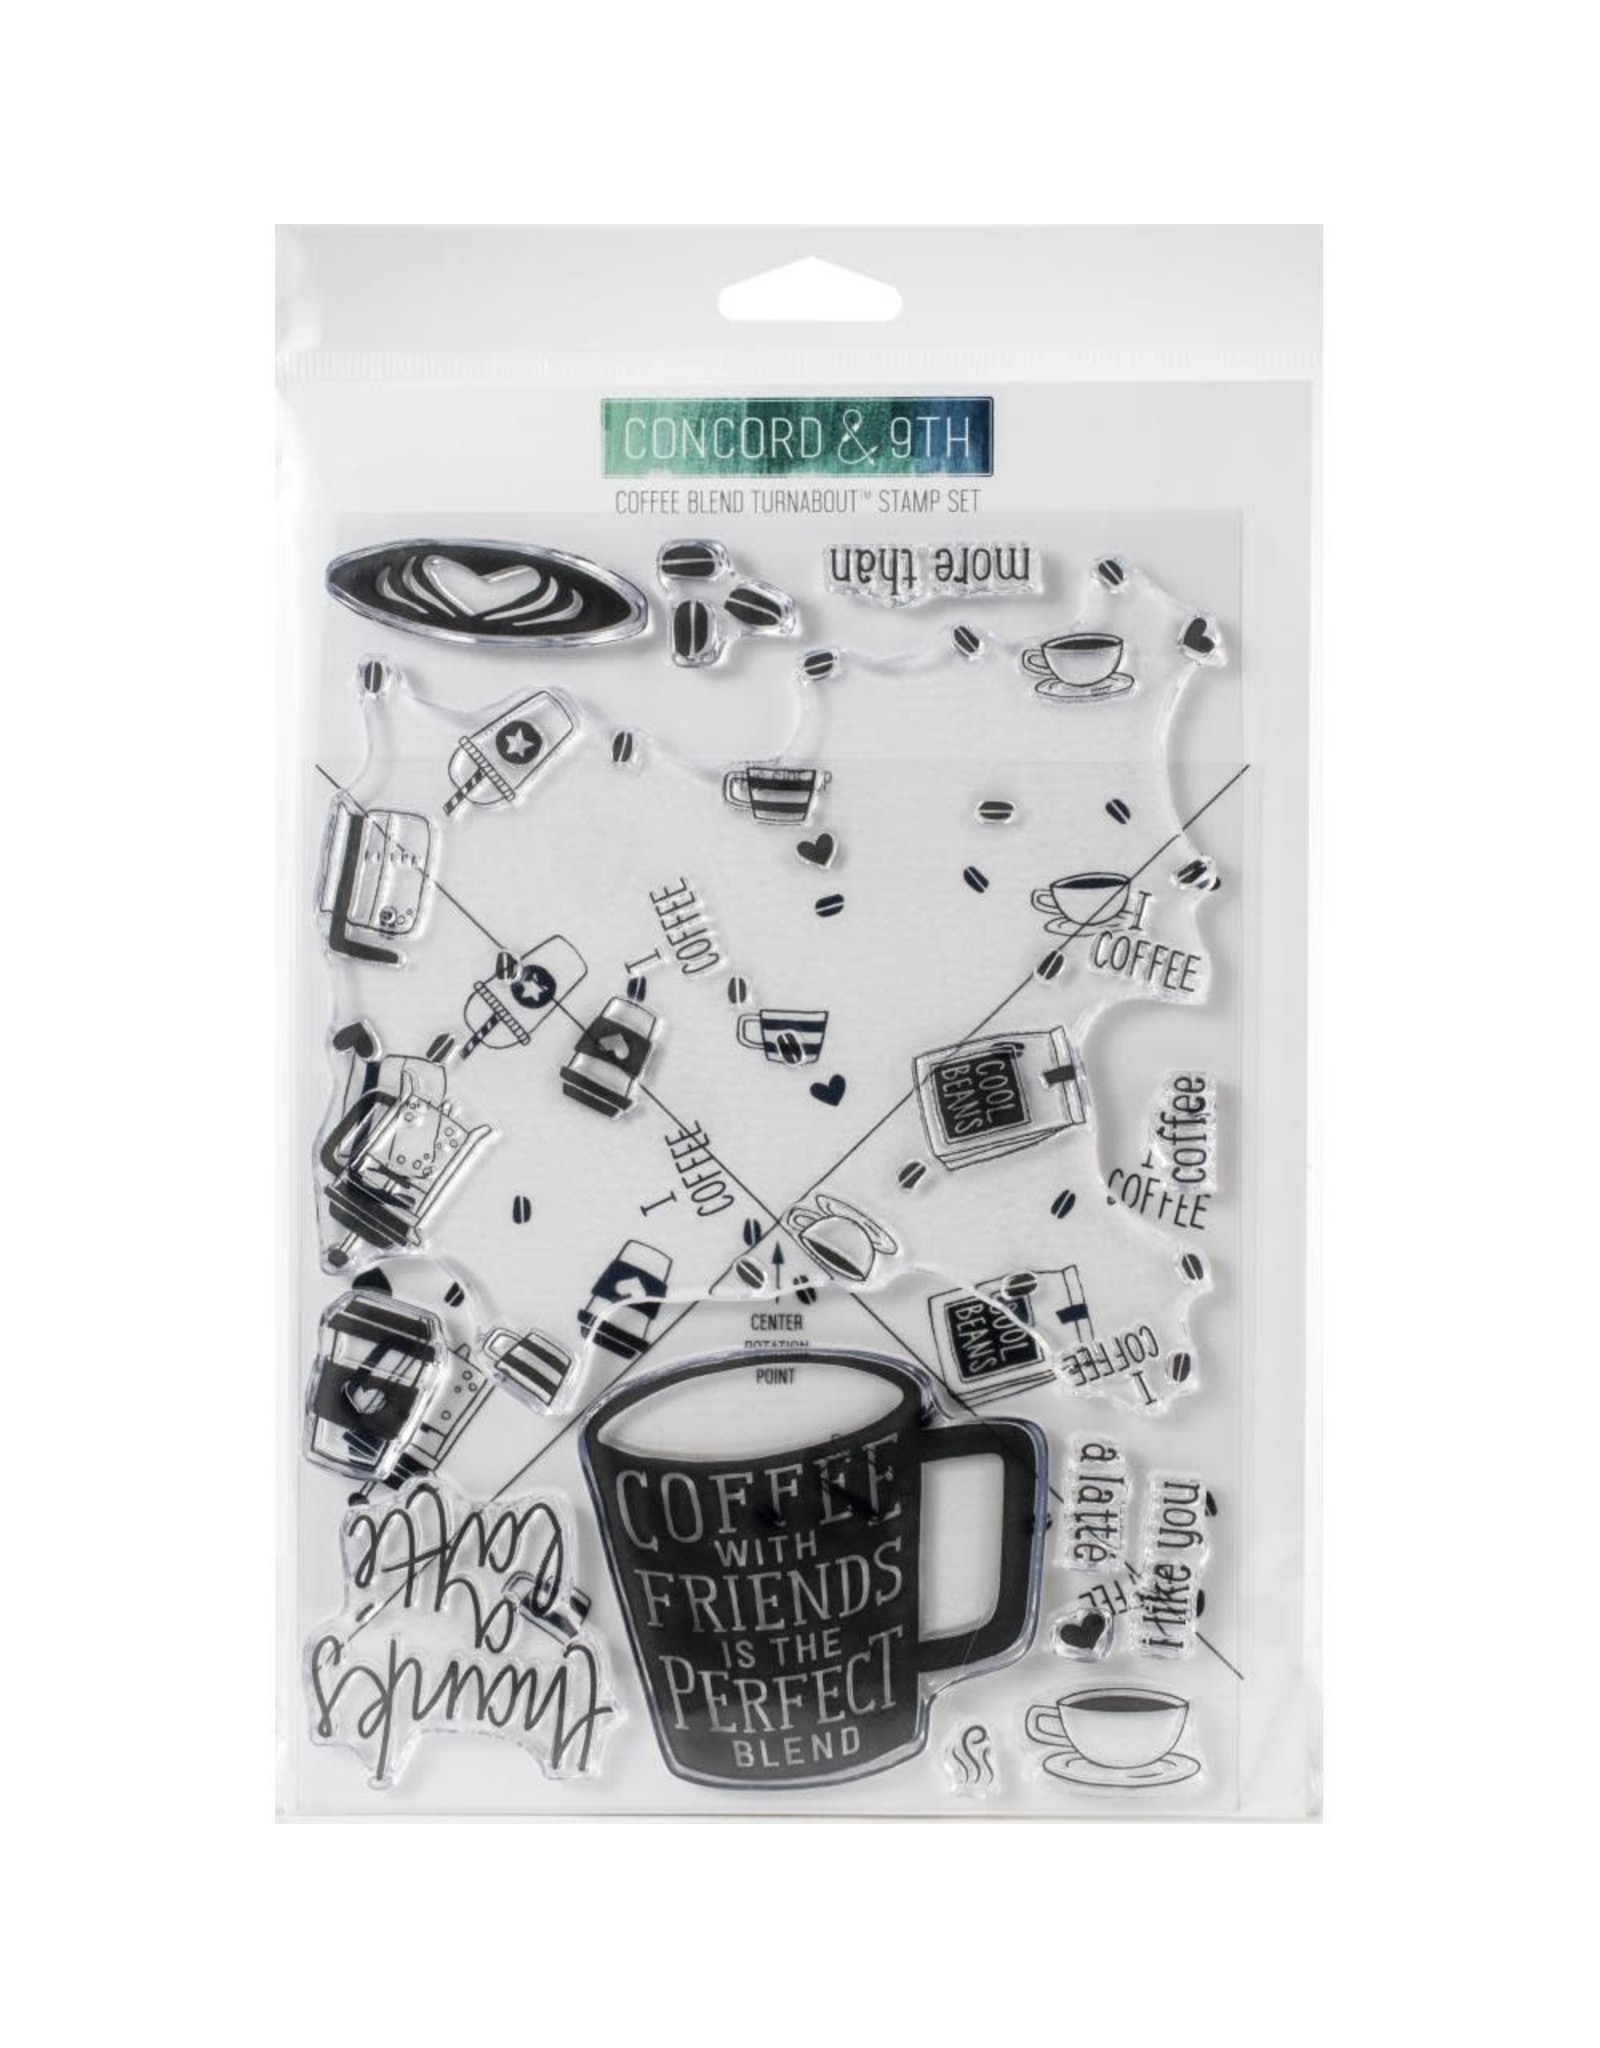 Concord & 9TH Coffee Blend Turnabout™ Stamp Set